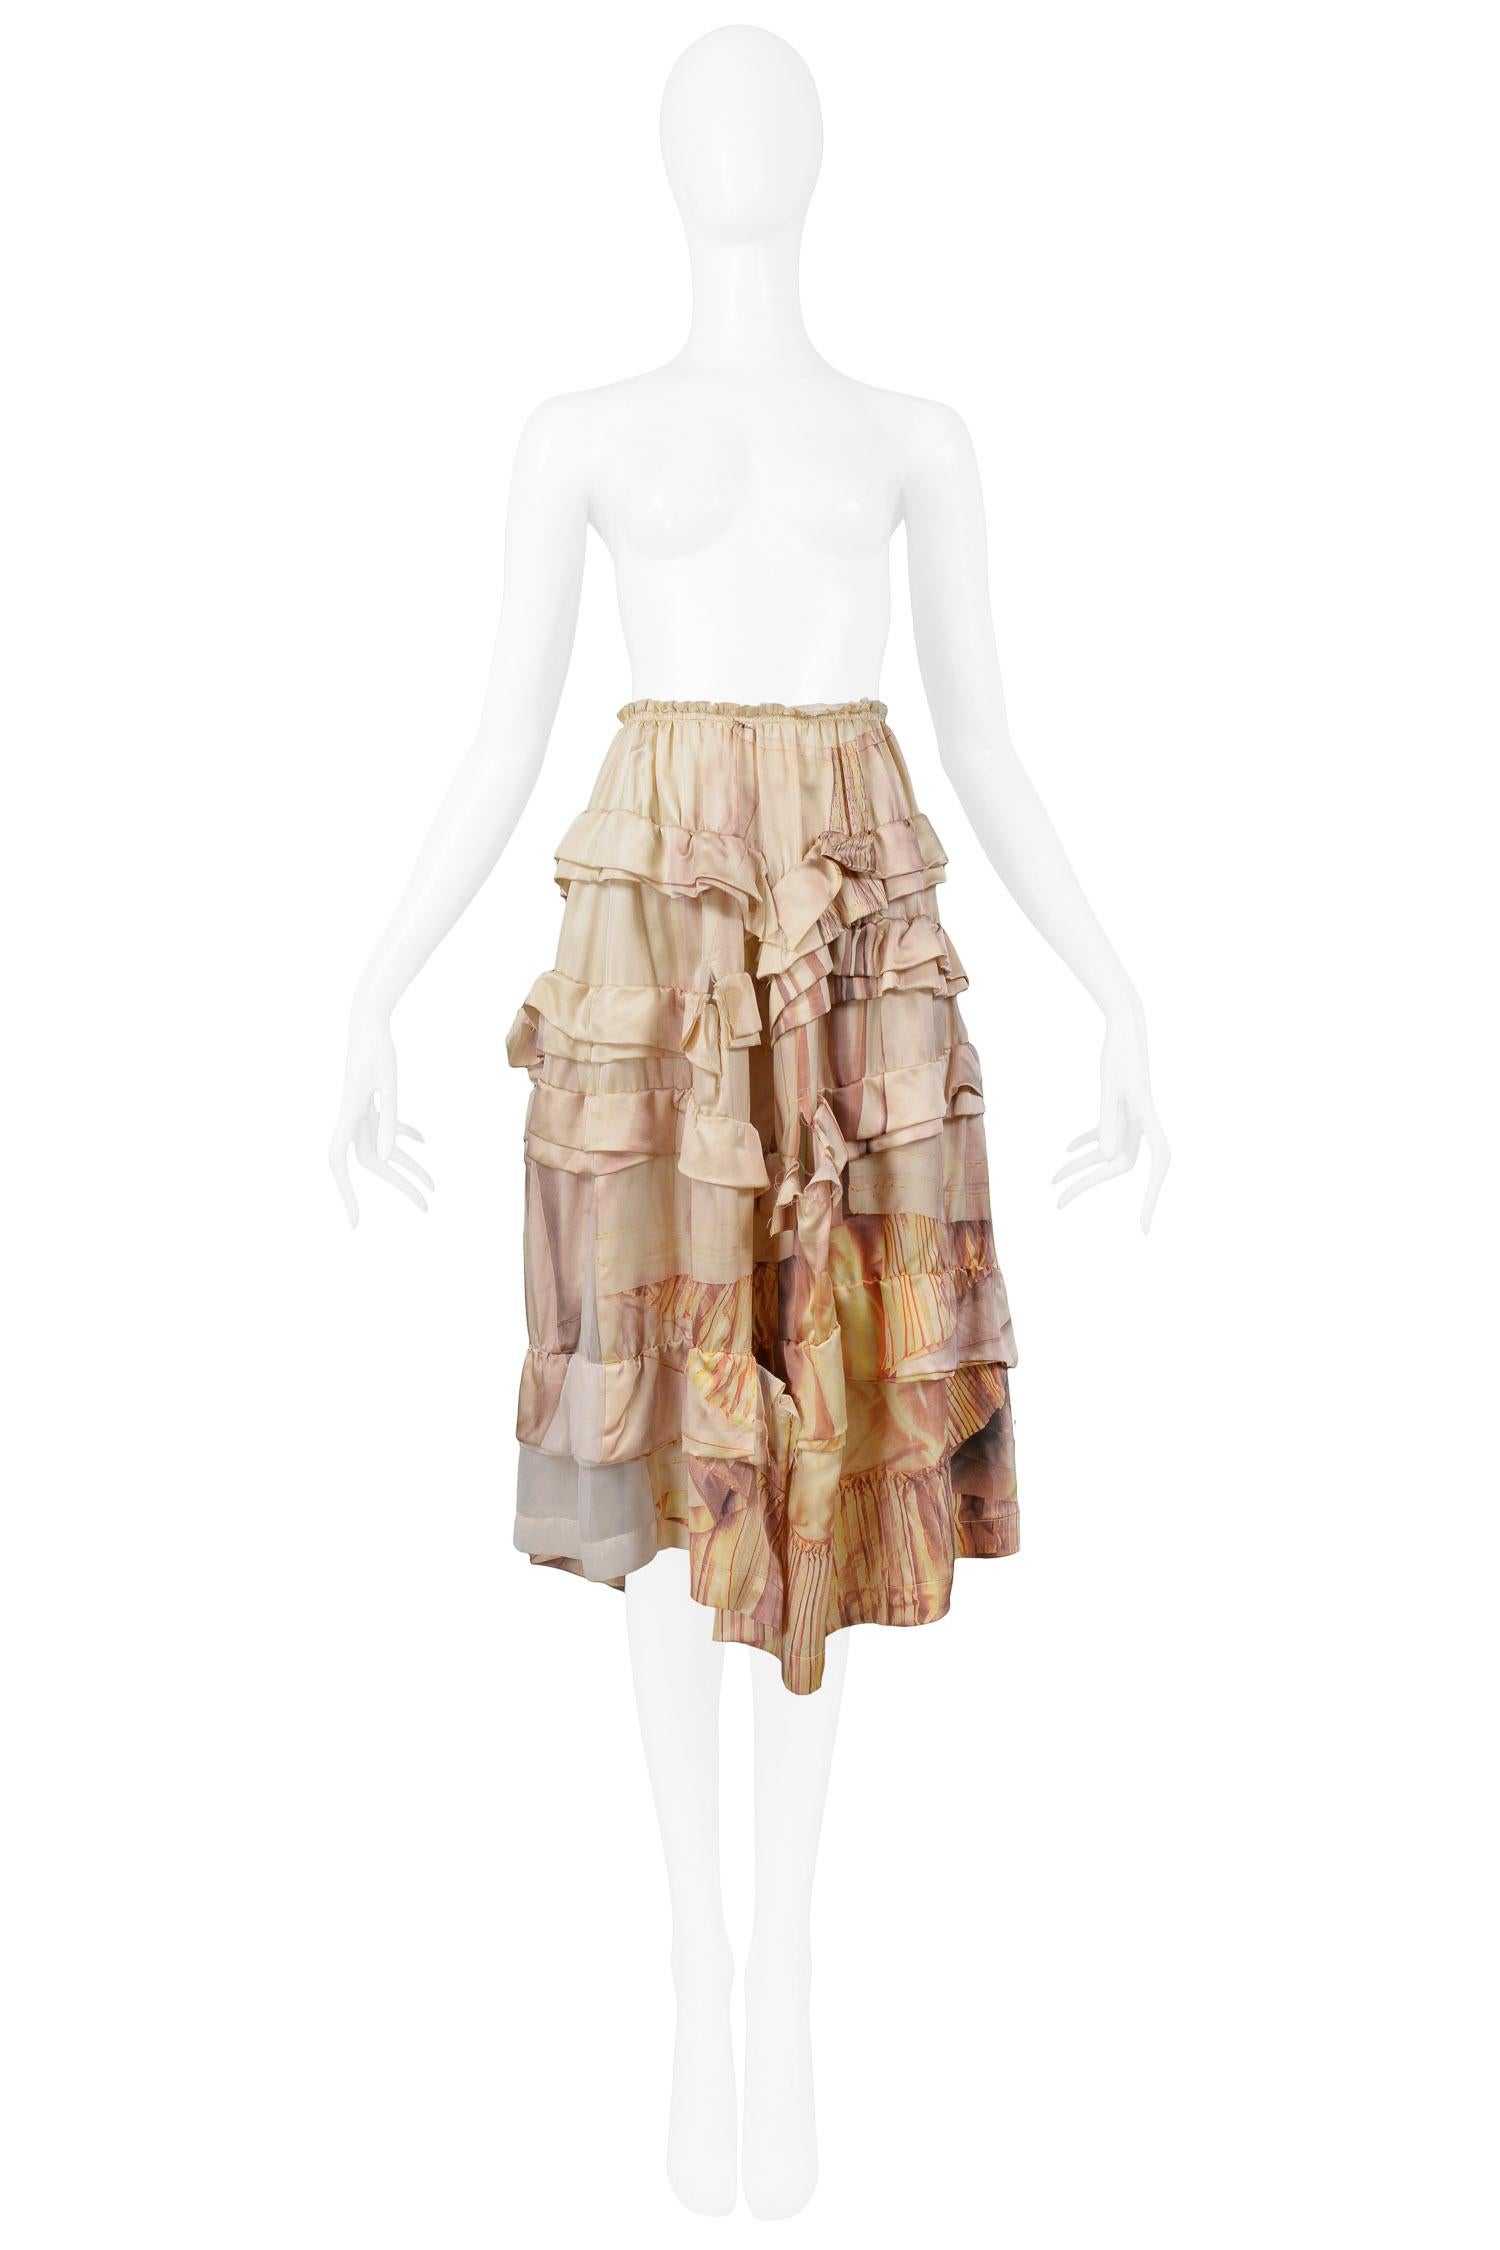 Vintage Comme des Garcons ivory satin tiered ruffle skirt with trompe l'oeil print and asymmetric hem. Broken Bride collection AW 2005.

Excellent Vintage Condition.

Size Small